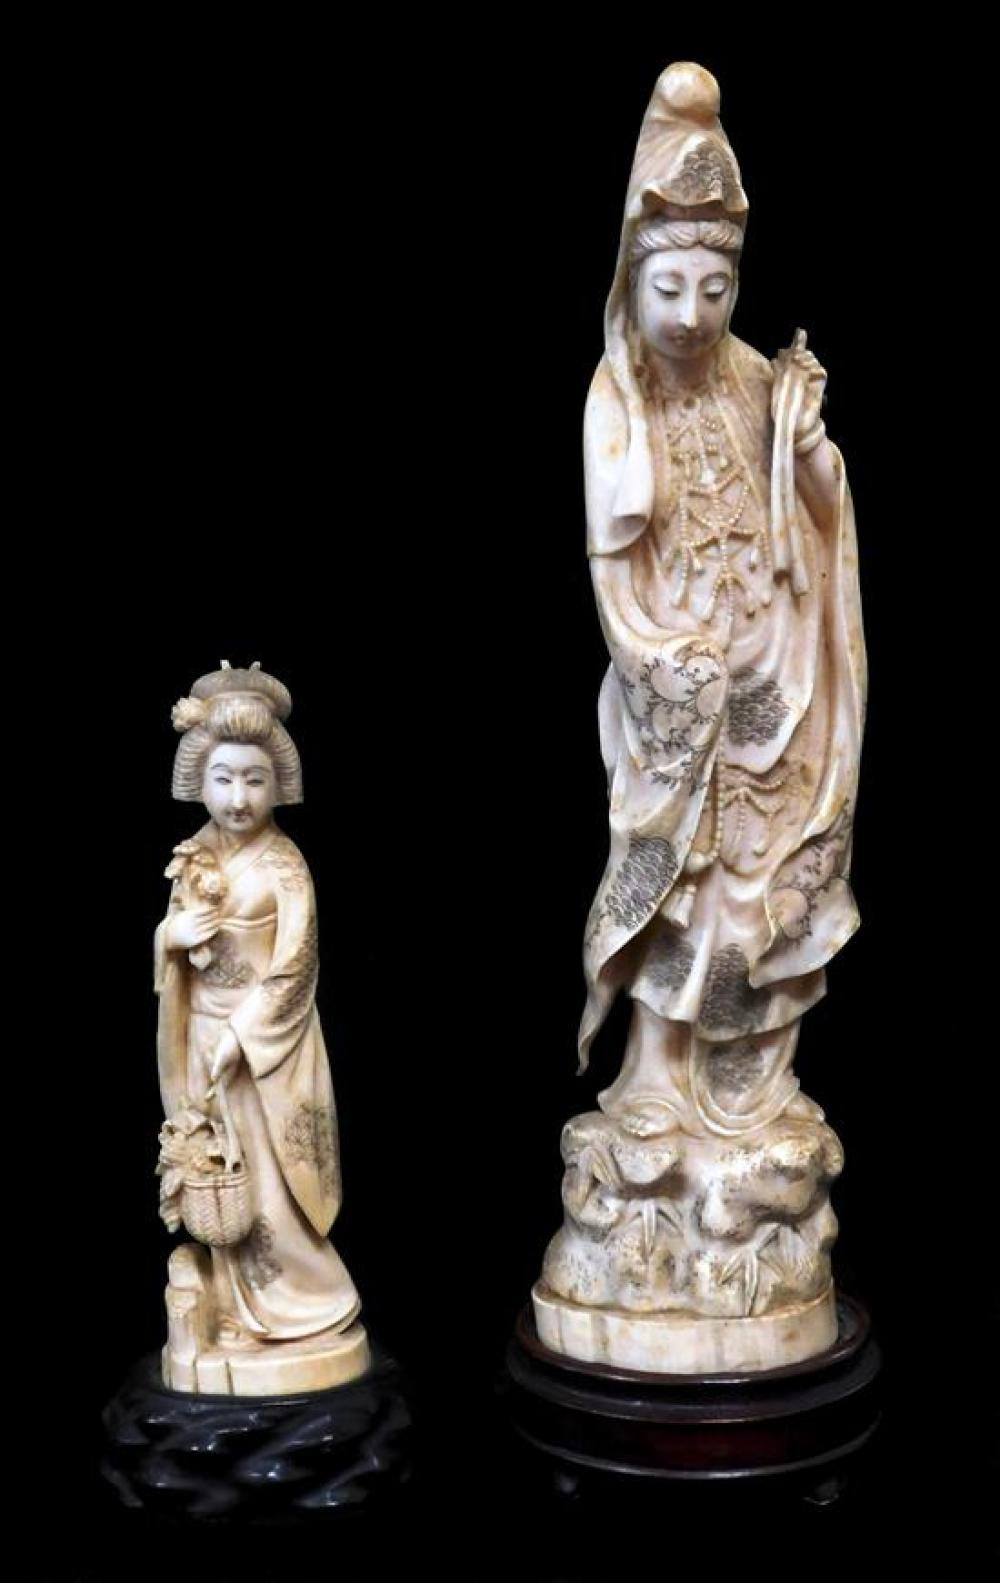 TWO IVORY CARVINGS, JAPANESE, 19TH/20TH